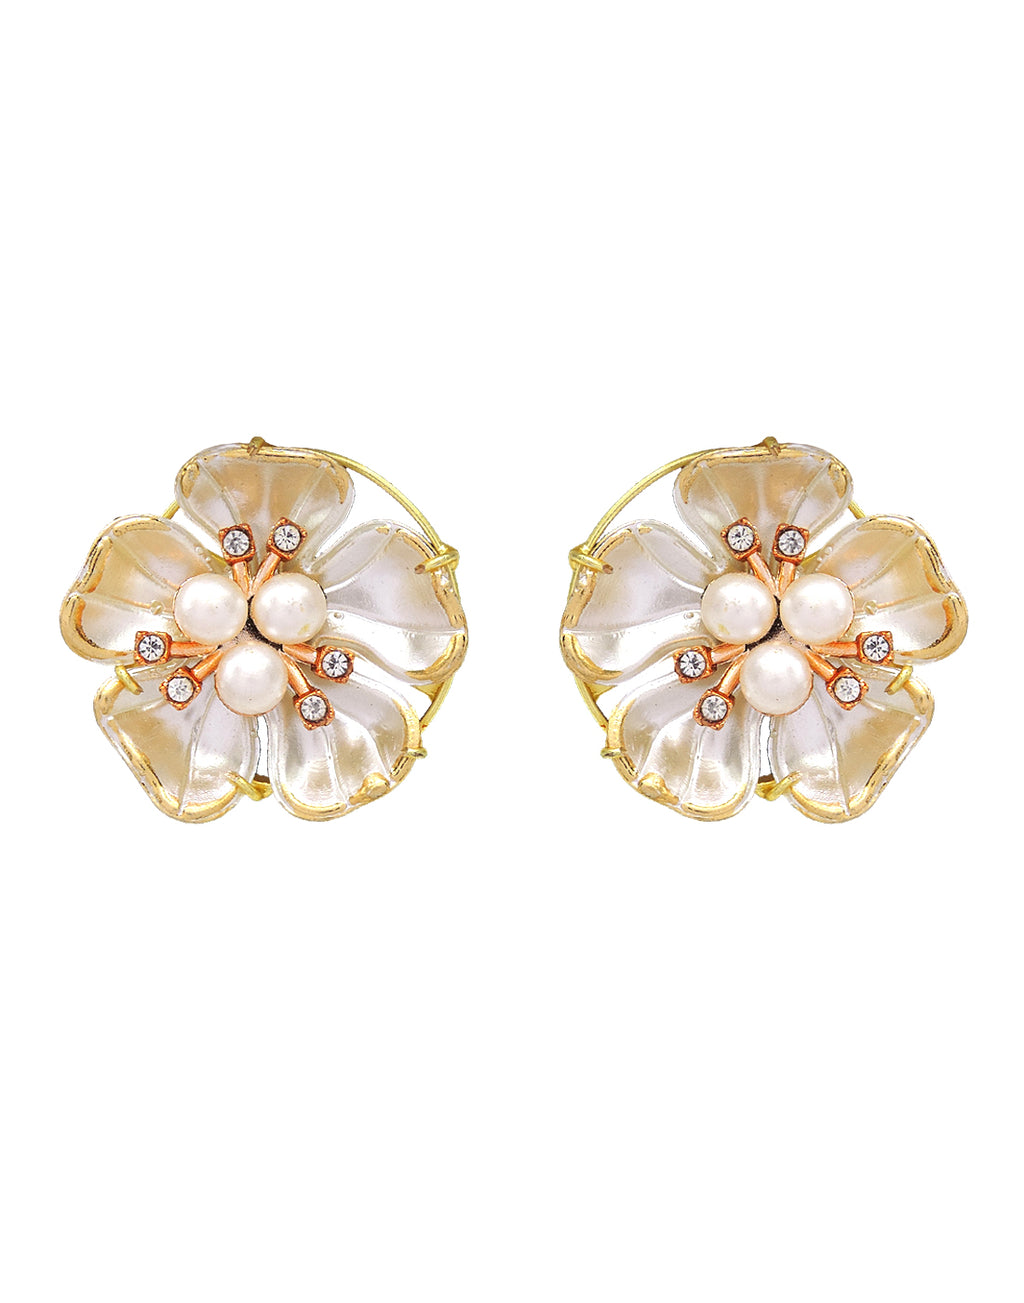 White Lily Earrings - Statement Earrings - Gold-Plated & Hypoallergenic Jewellery - Made in India - Dubai Jewellery - Dori